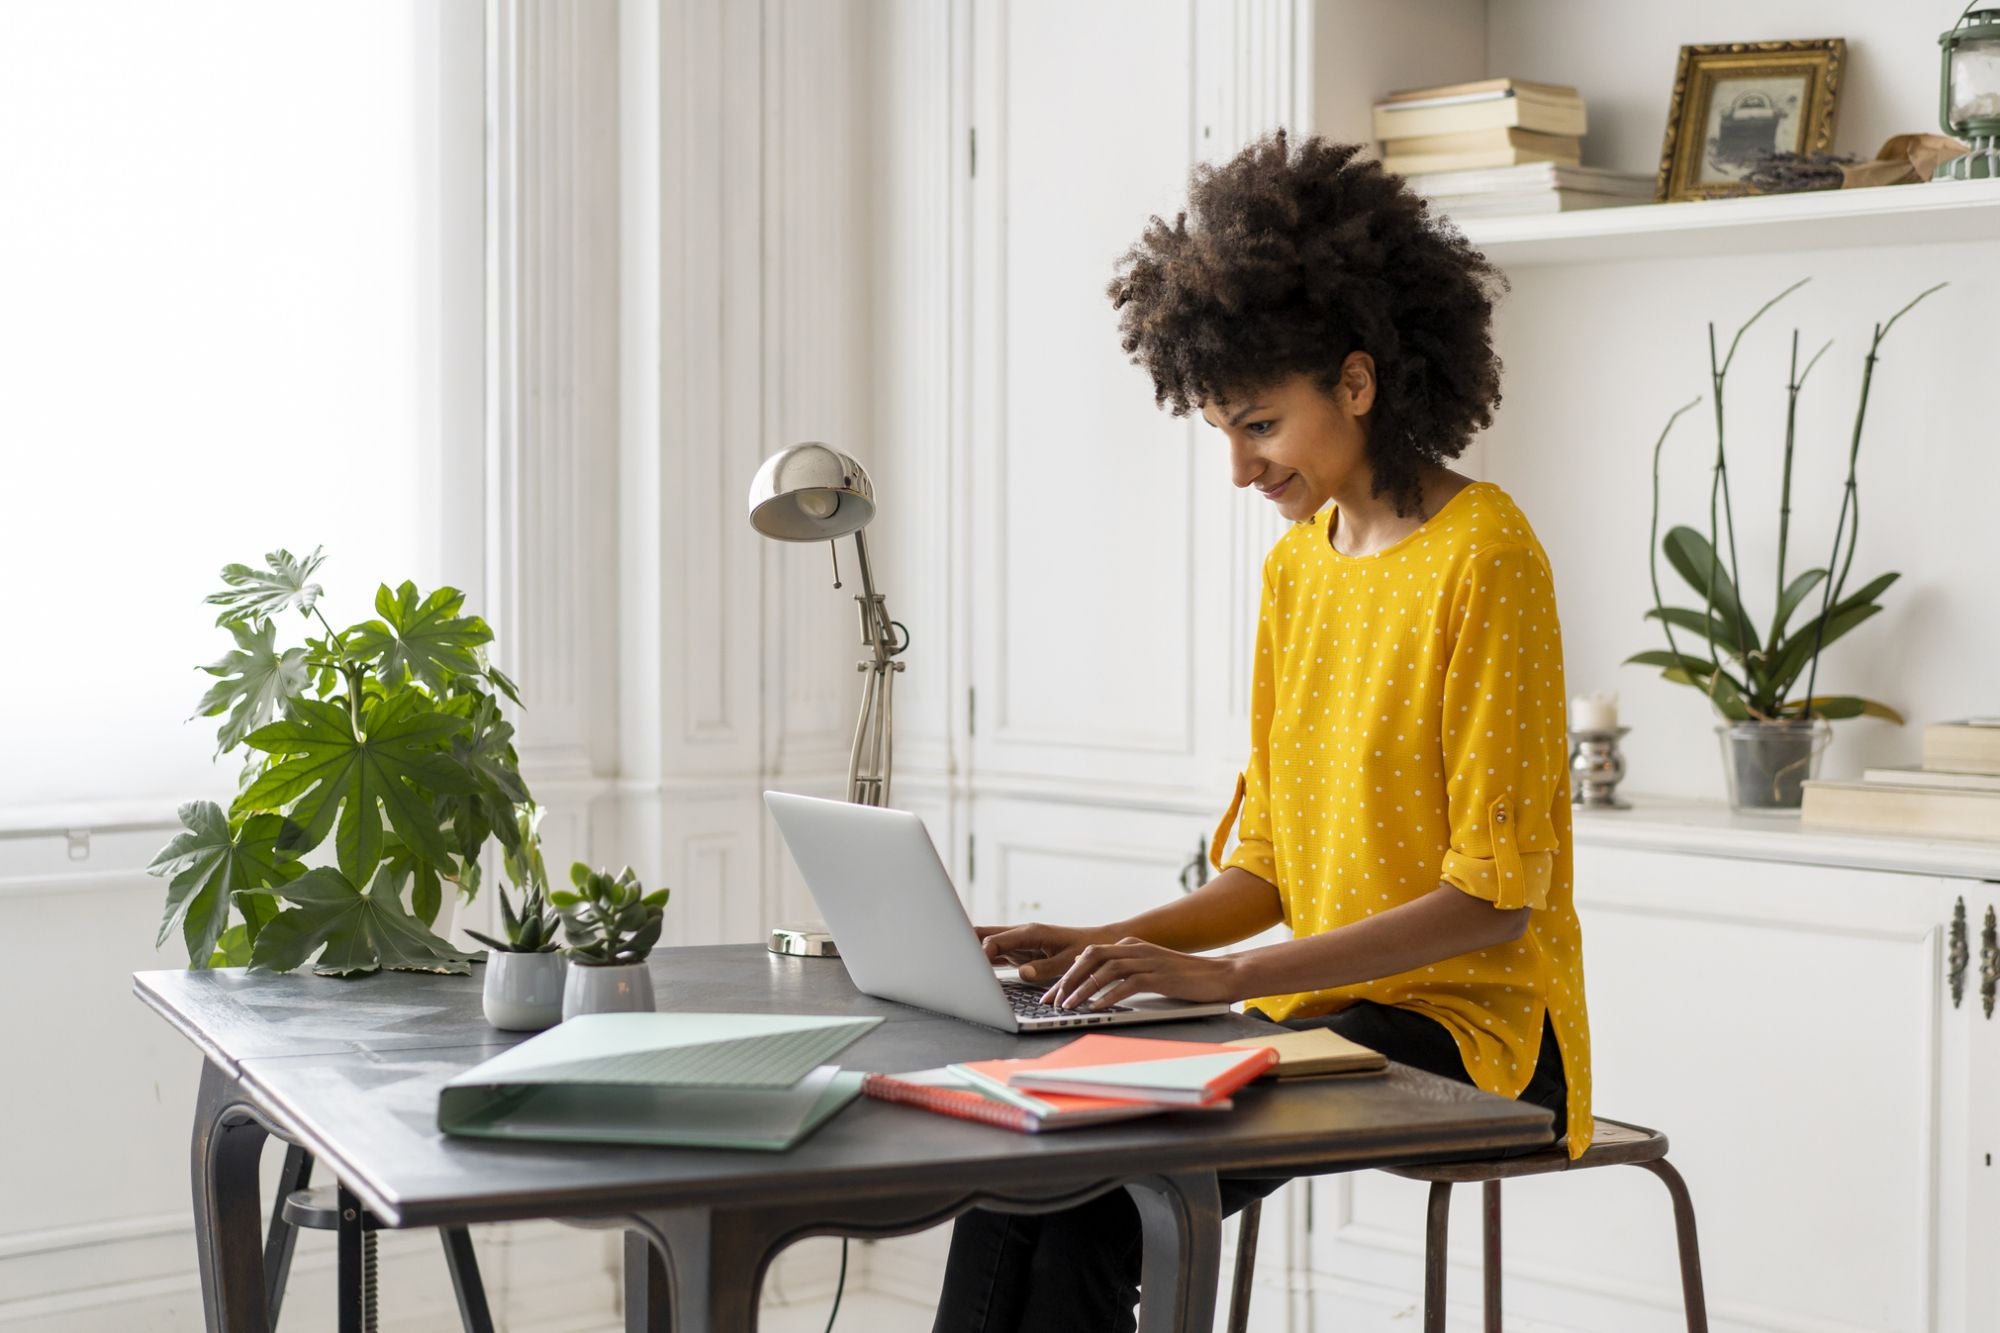 10 Tips From CEOs on Working From Home Effectively and Happily